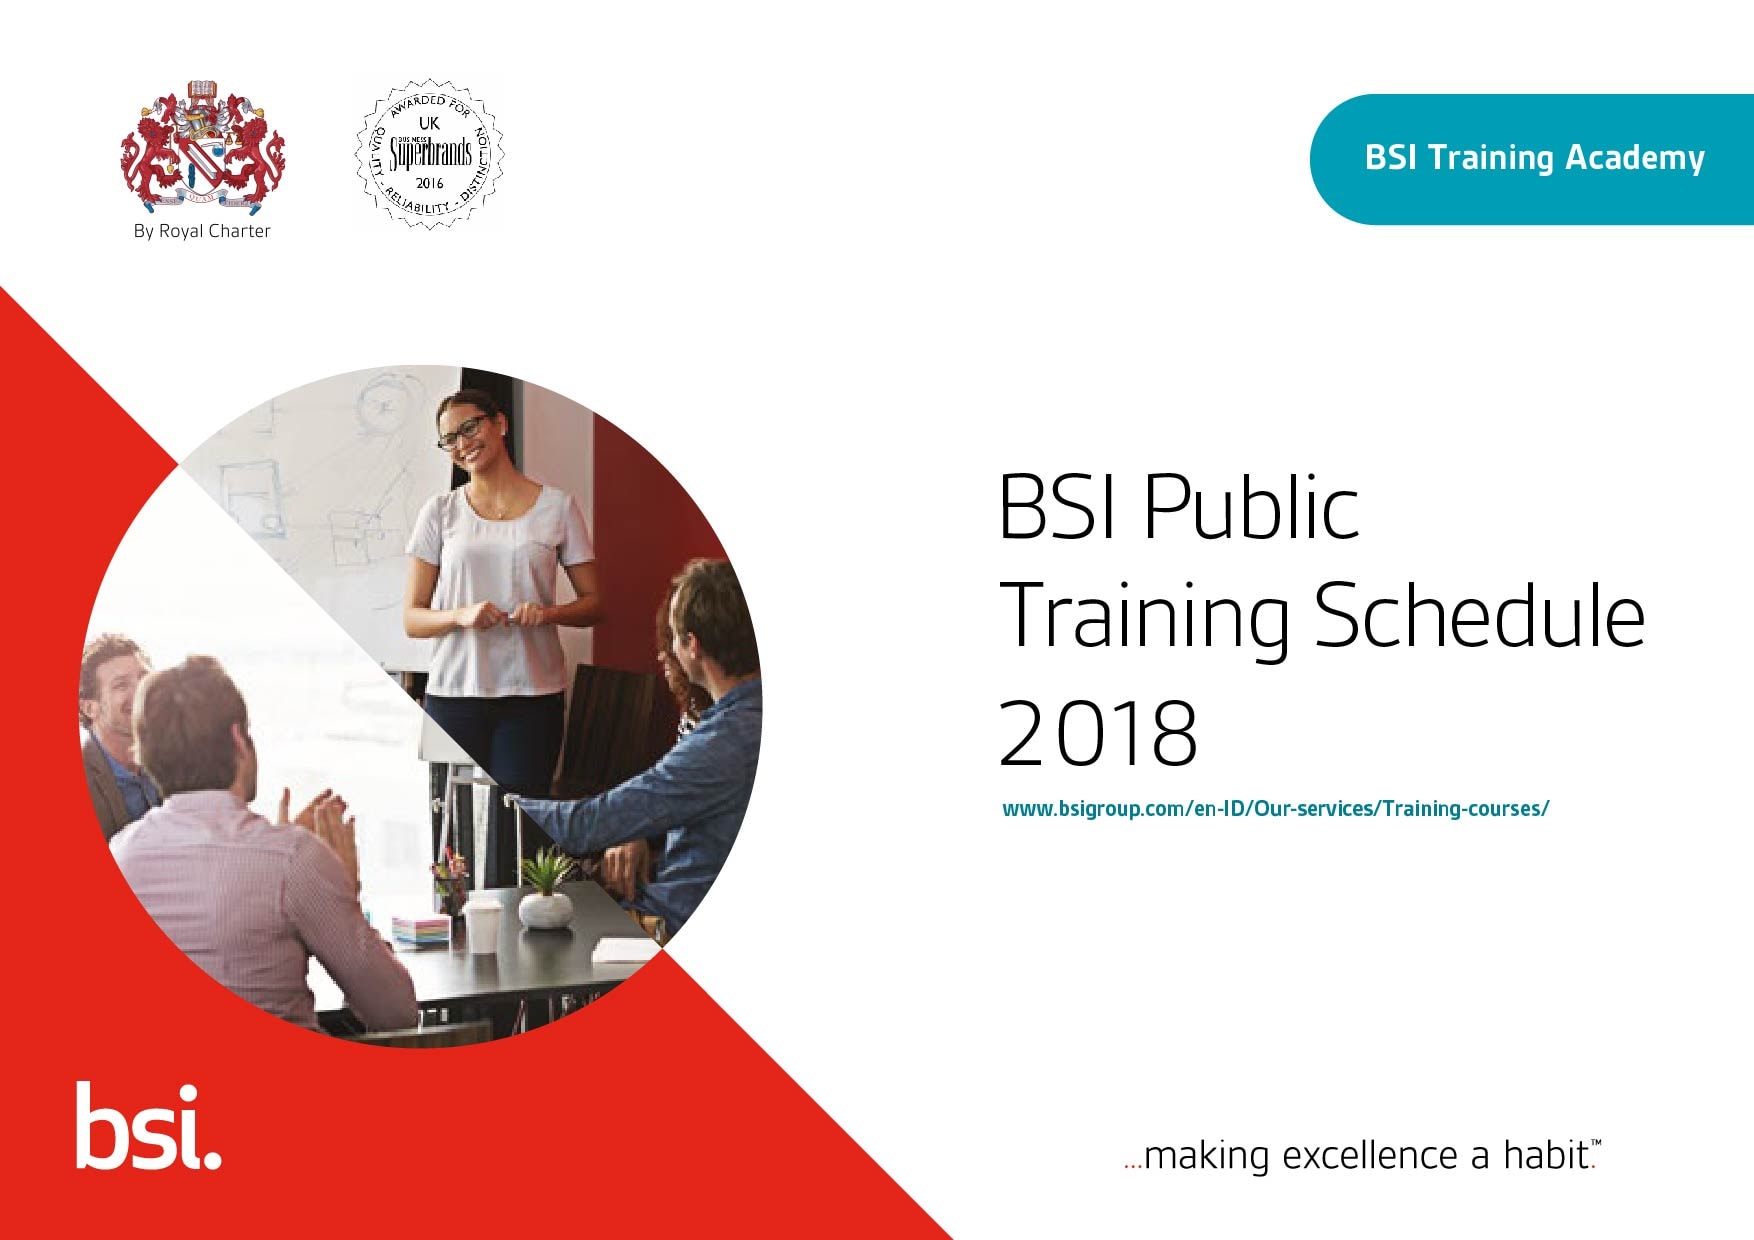 BSI Group Indonesia Standards, Training, Testing, Assessment and